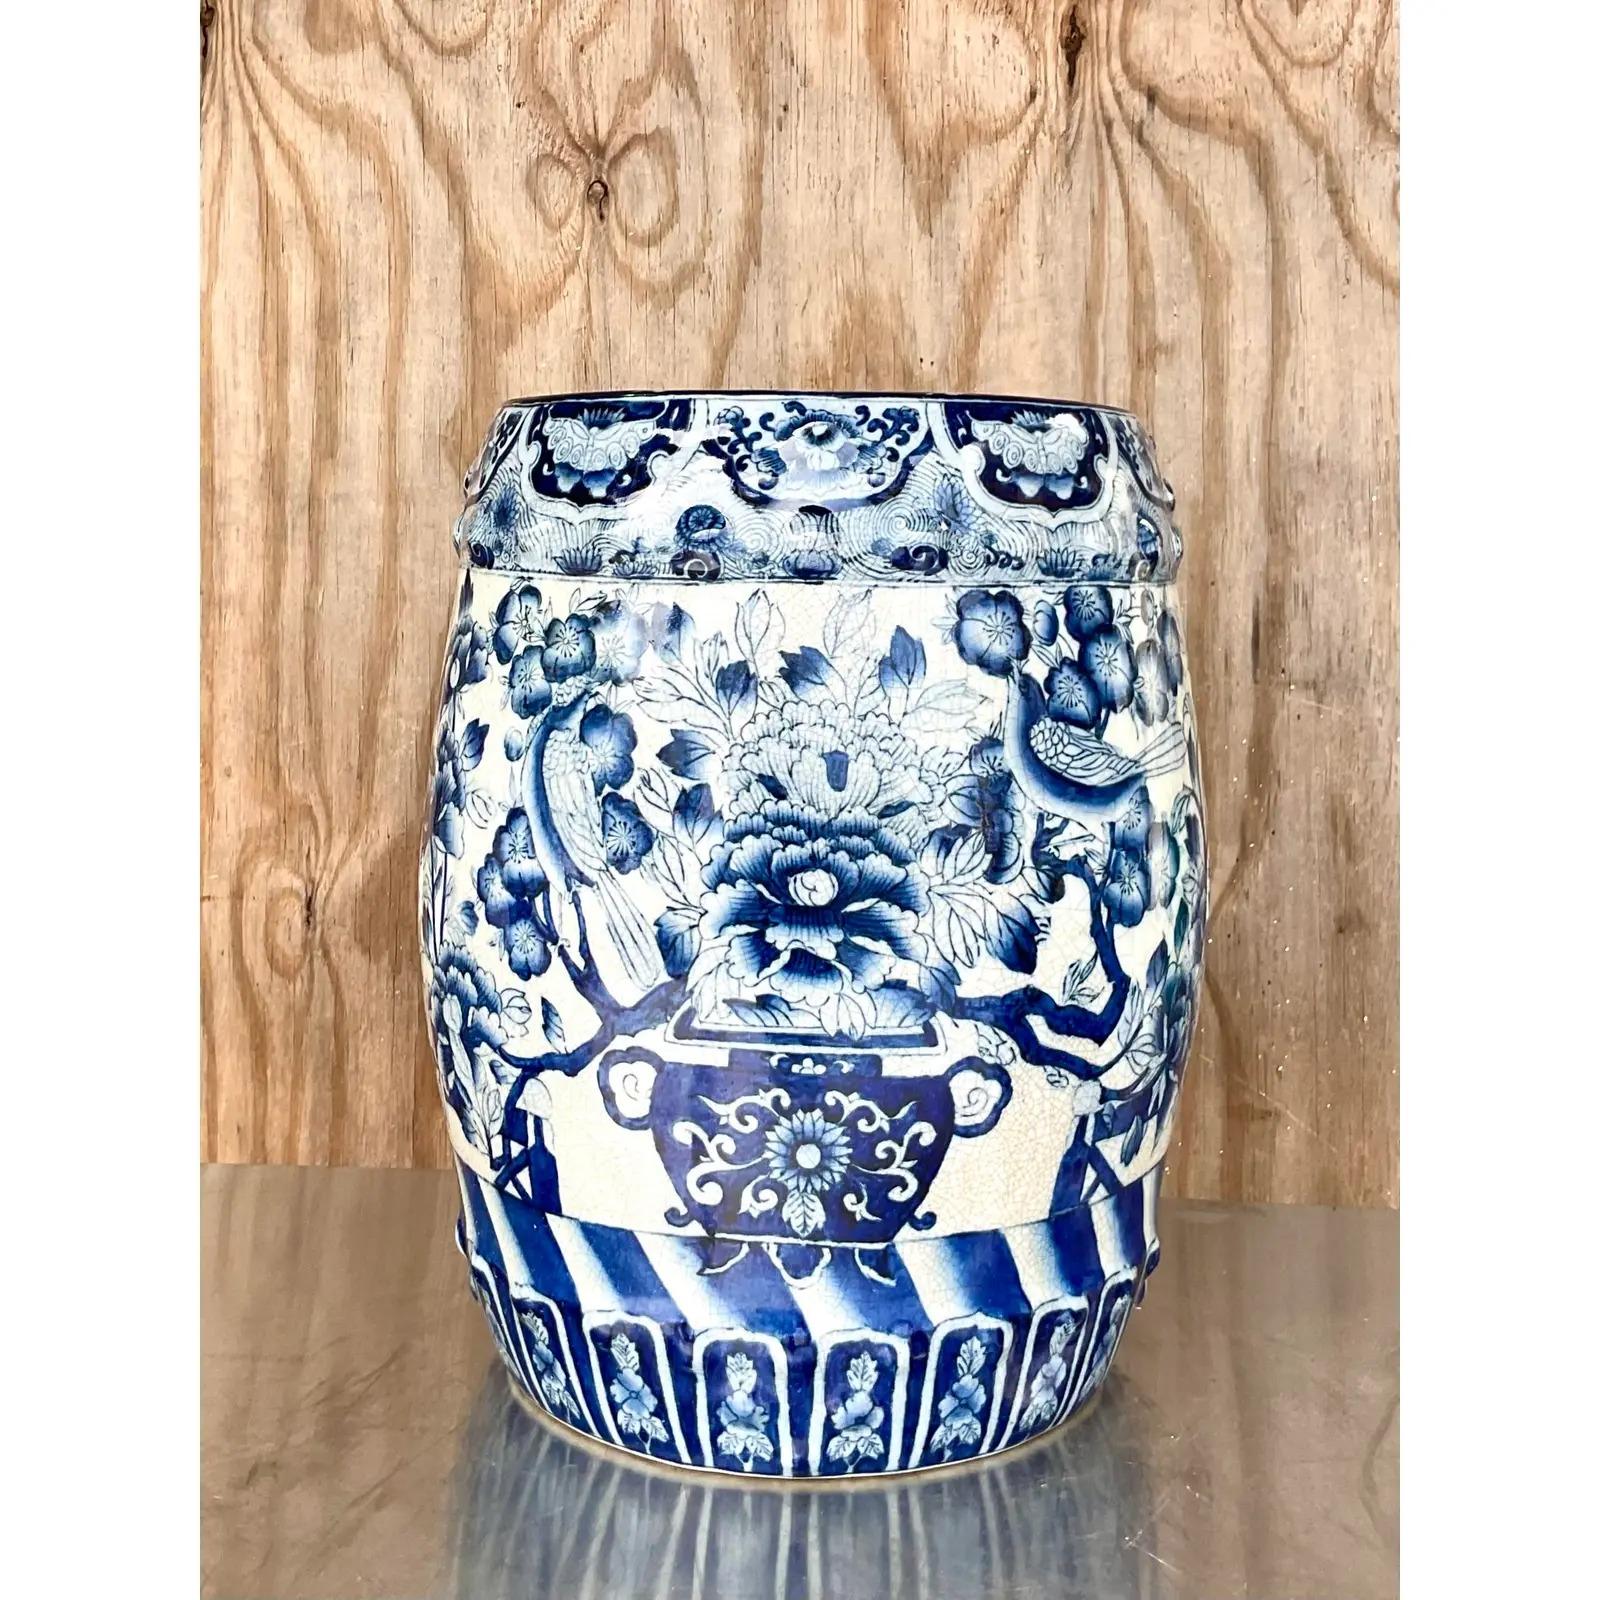 Gorgeous vintage blue and white garden stool. A beautiful Ming design in a chic glazed ceramic. Perfect indoors our outside. Sure to add some charm to any space. Acquired from a Palm Beach estate.